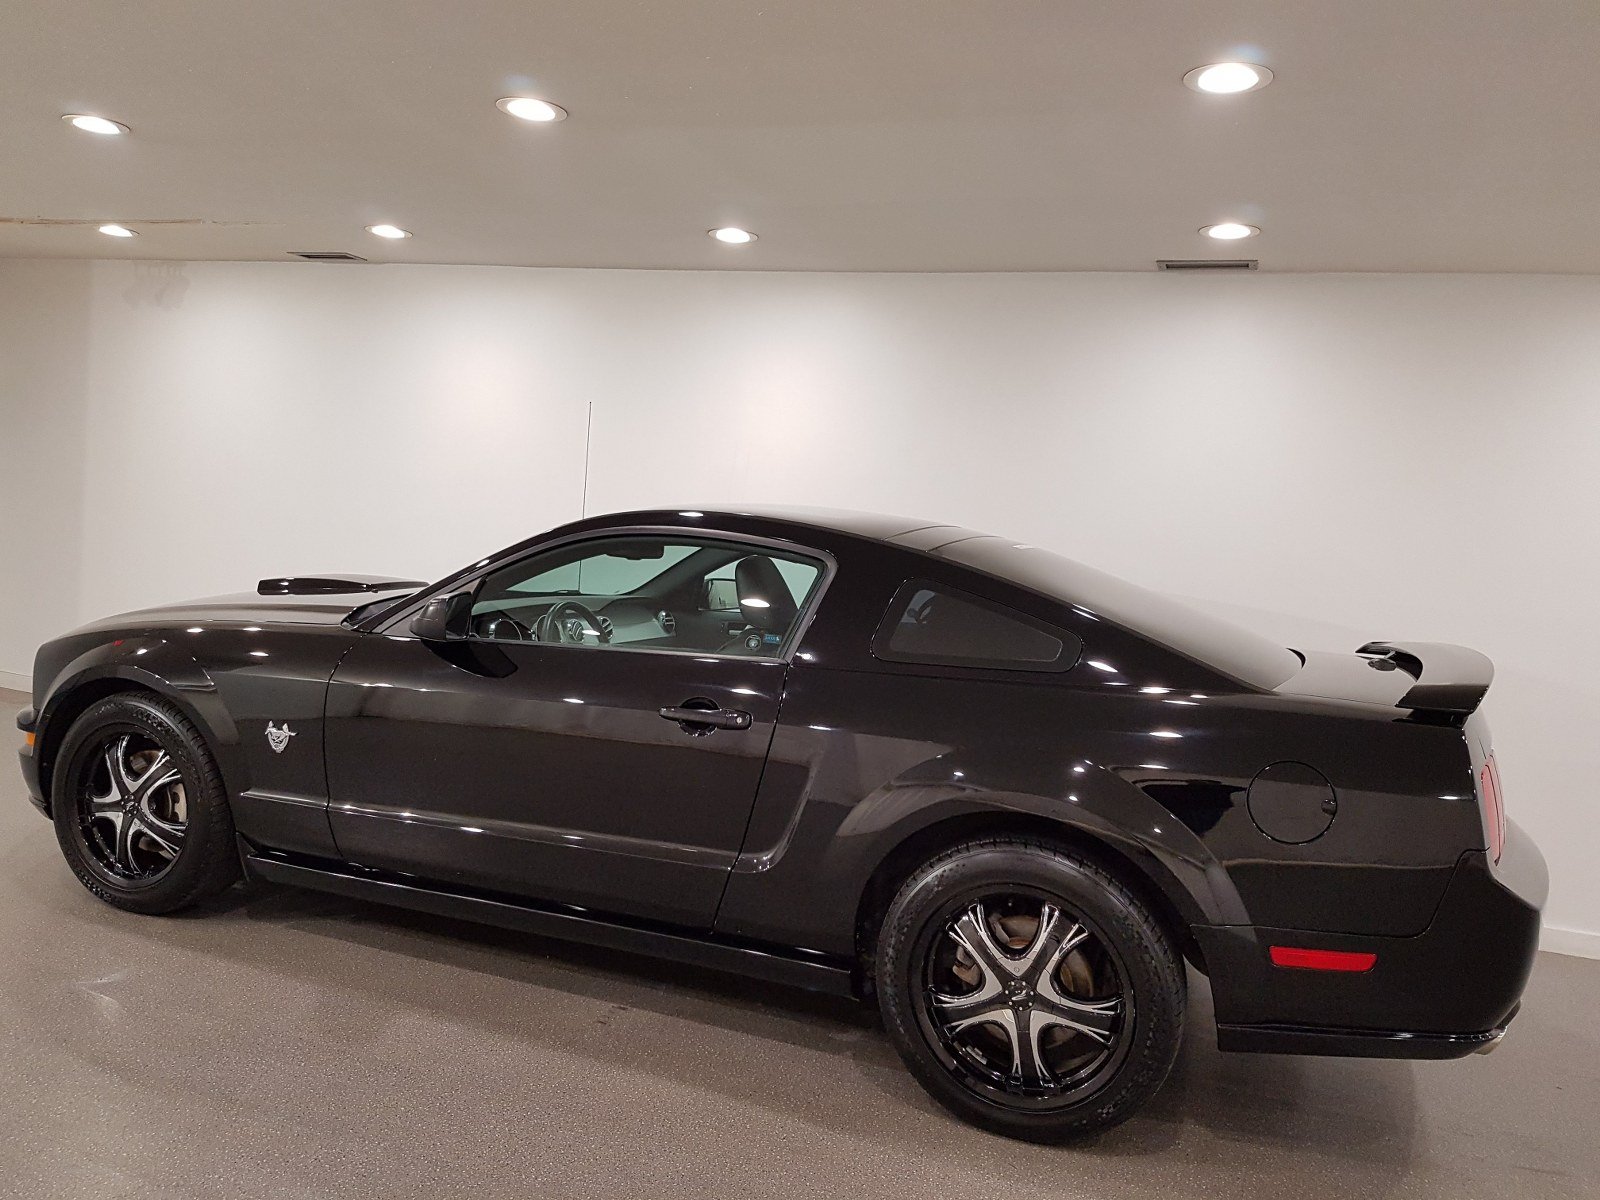 Pre Owned 2009 Ford Mustang Gt V8 5 Speed Manual Leather Moonroof Heated Seats Remote Starter Black Alloys Rwd 2dr Car